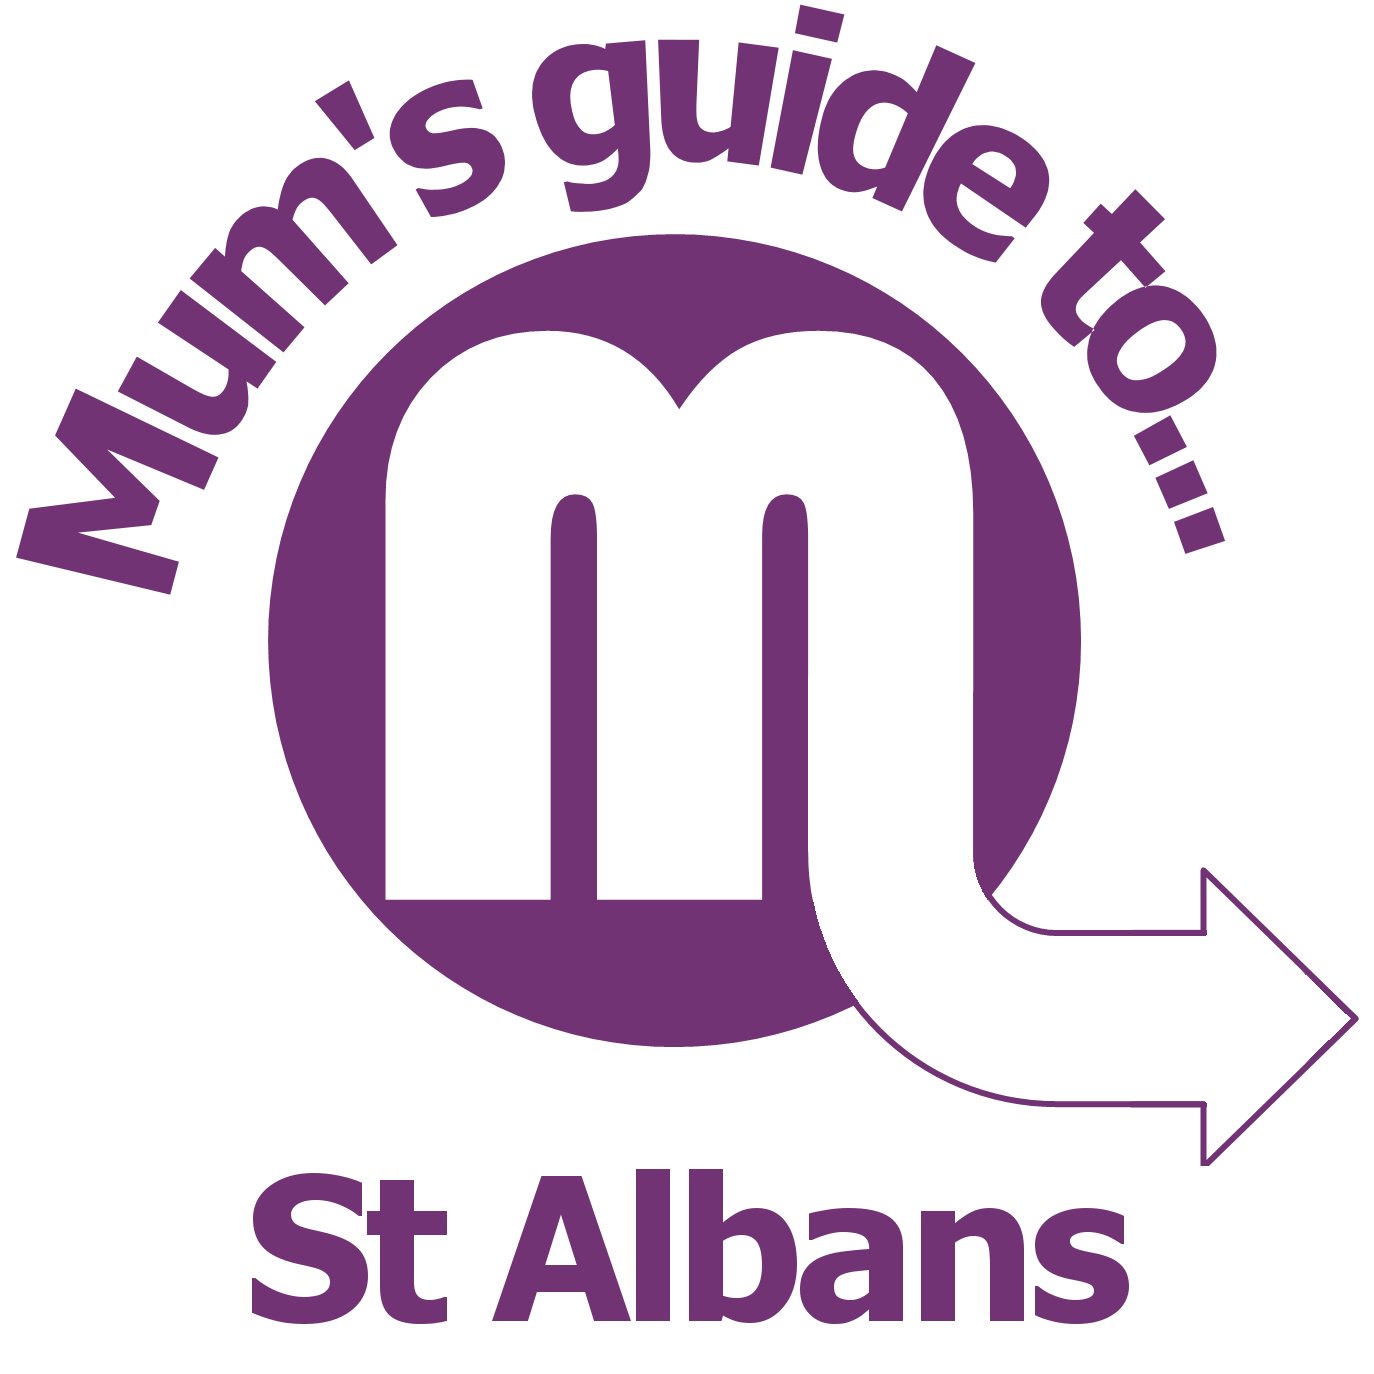 The go-to site for everything to do with children and families in St Albans. Get in touch to have your event/business/organisation listed on the site for free.